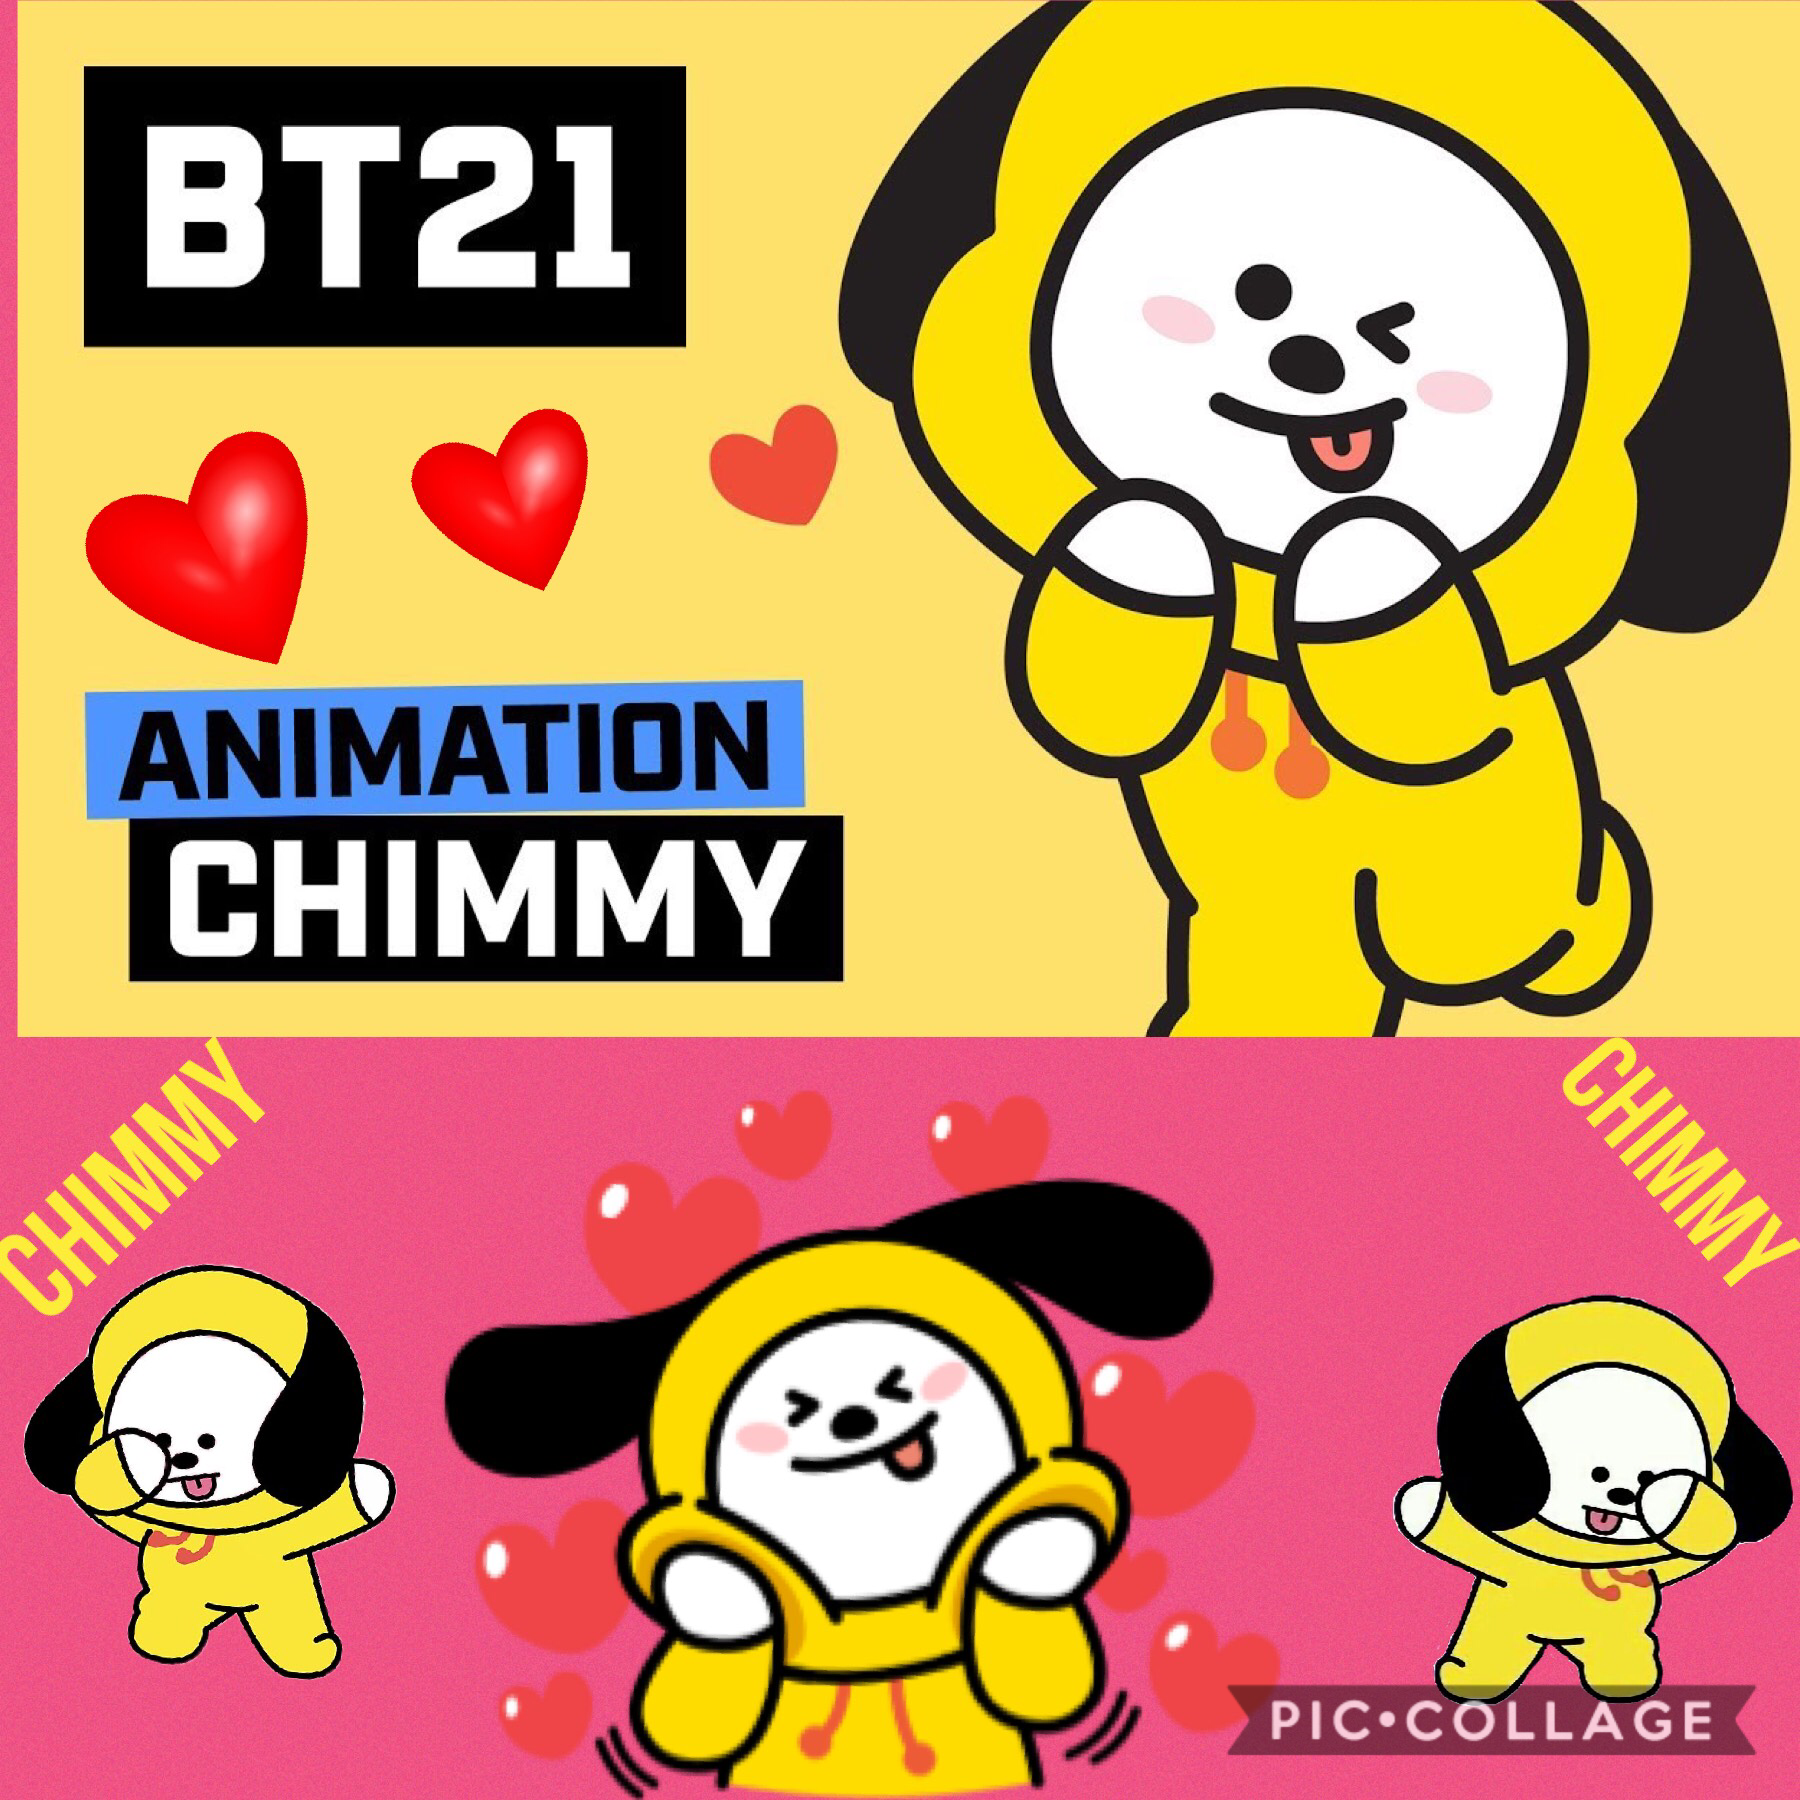 Comment: #CHIMMY in capital letters and I will follow u.
